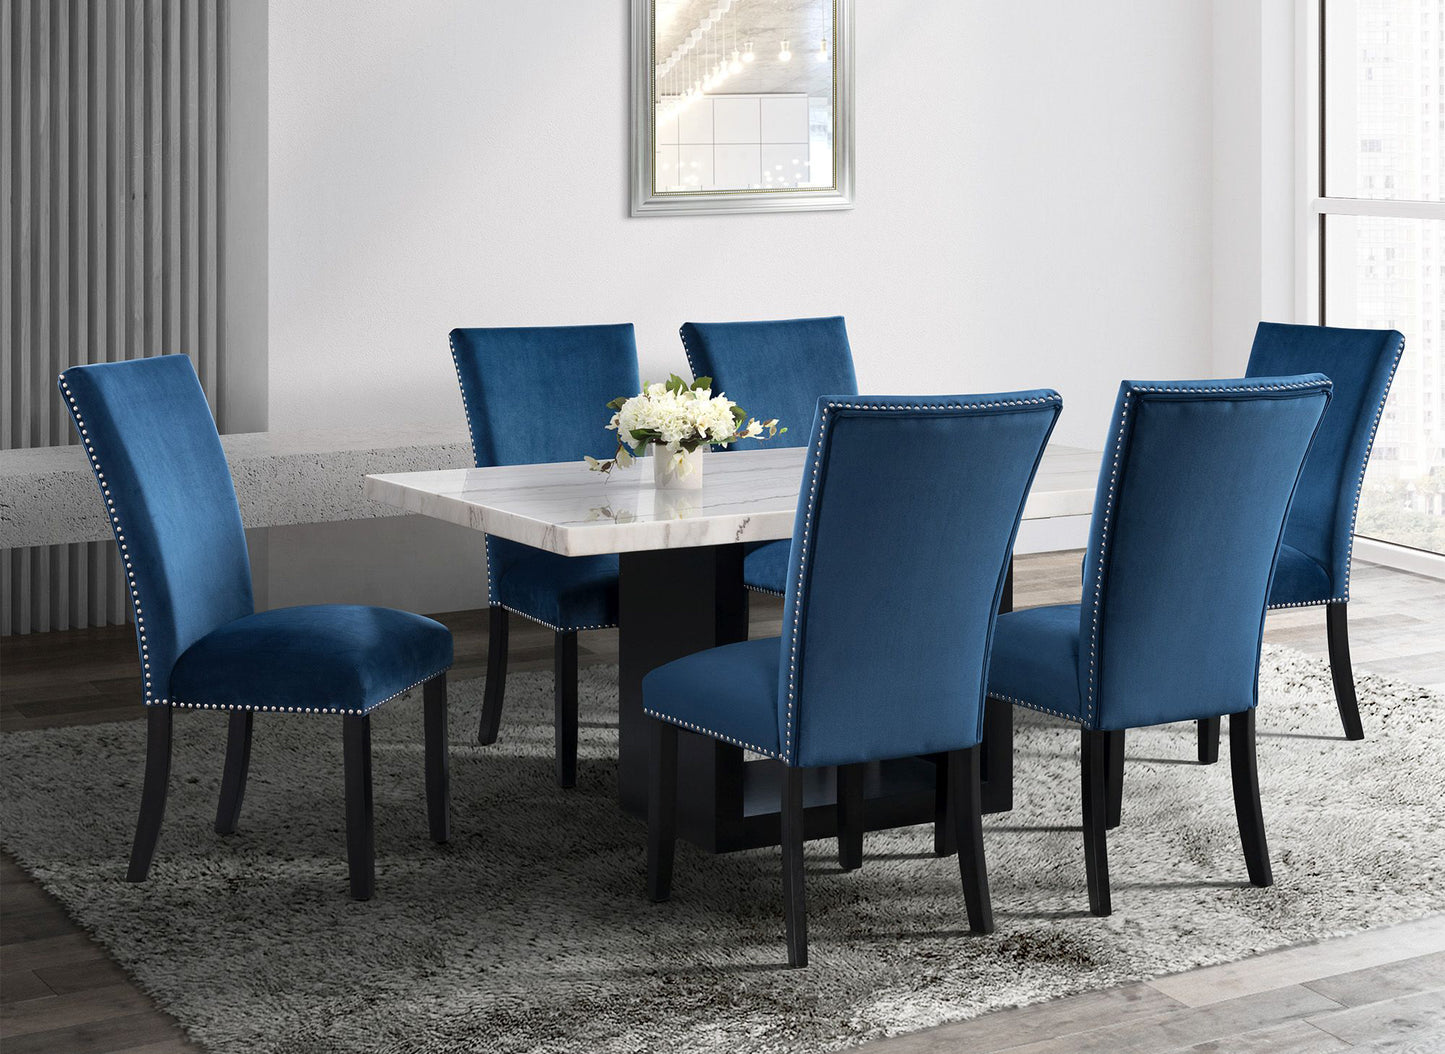 Francesca 5 Piece Dining Set with Blue Chairs